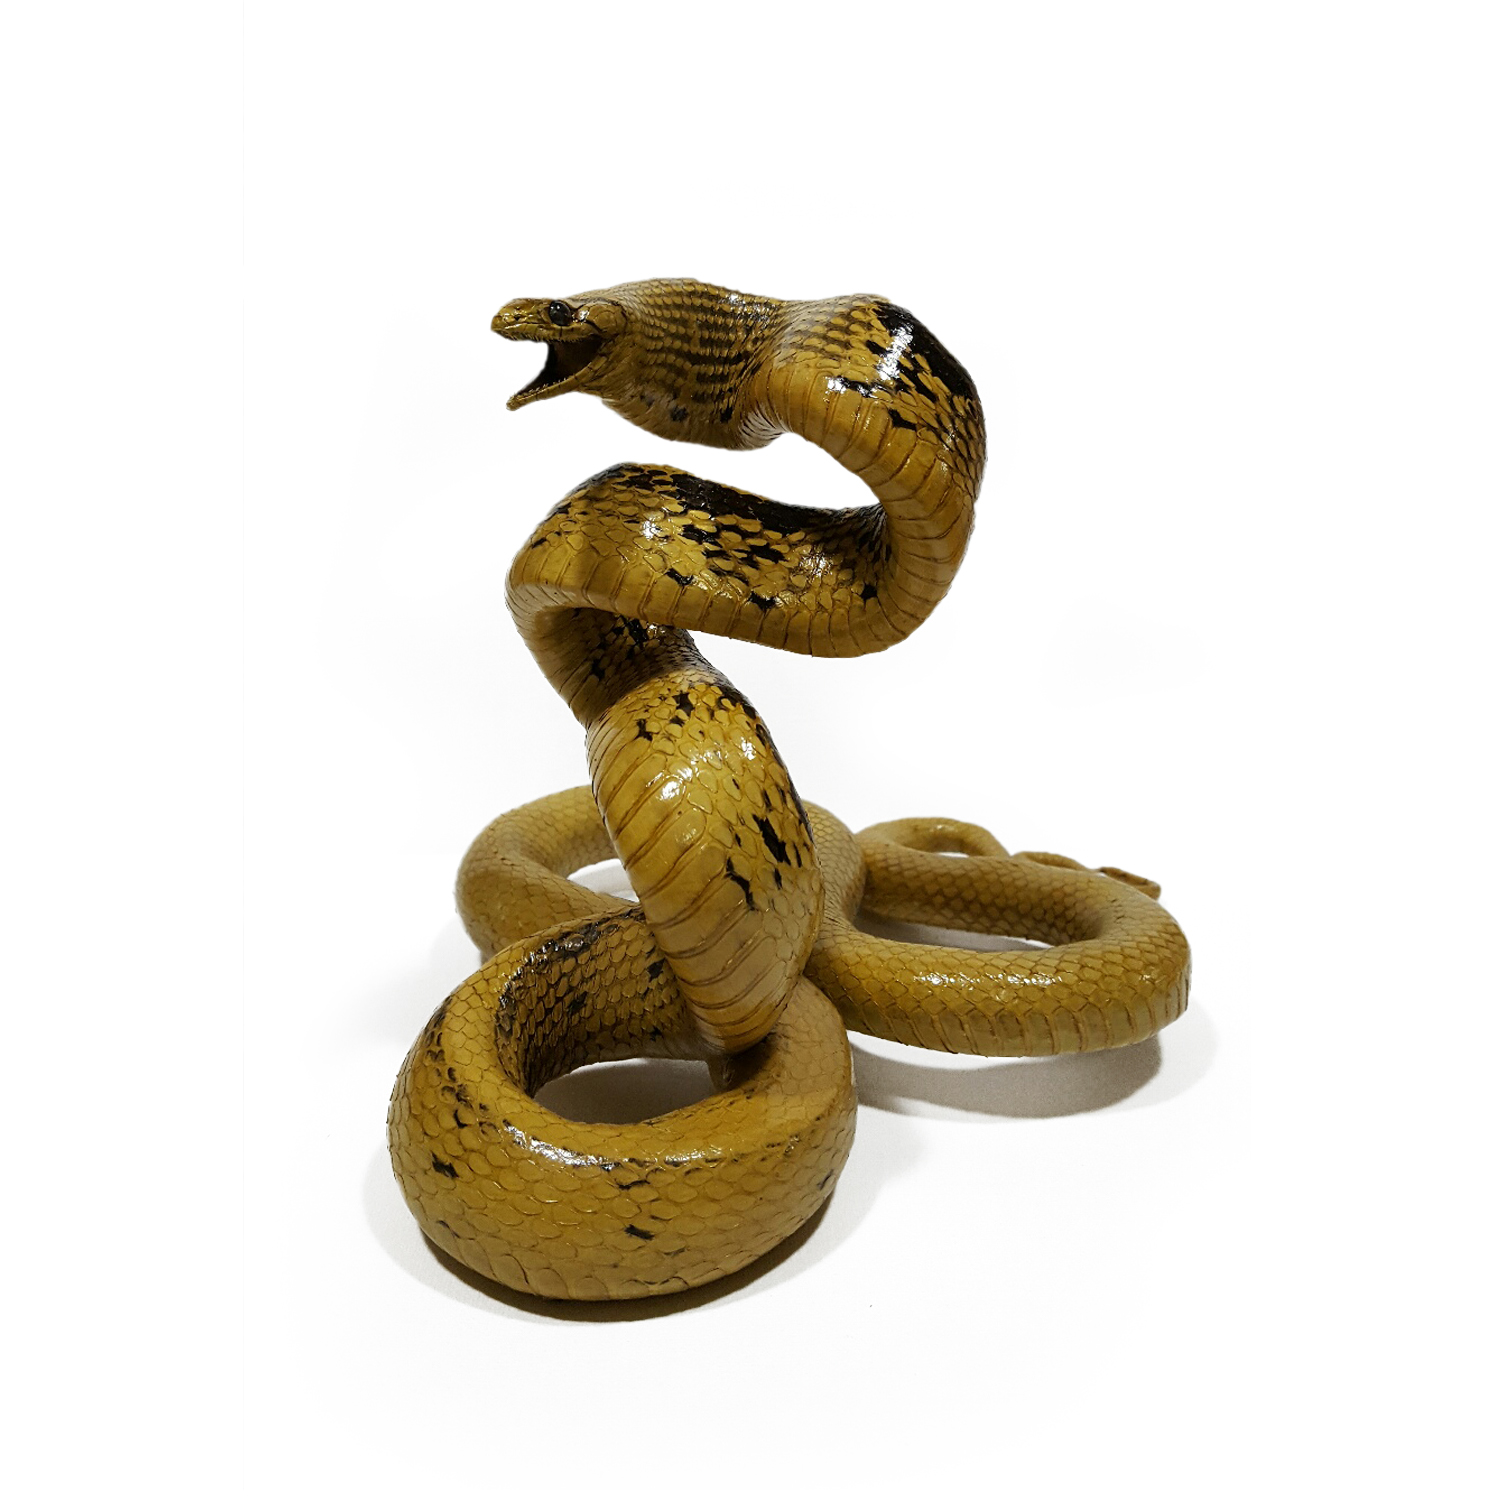 Copperhead Racer Snake Watching Style Taxidermy Mount